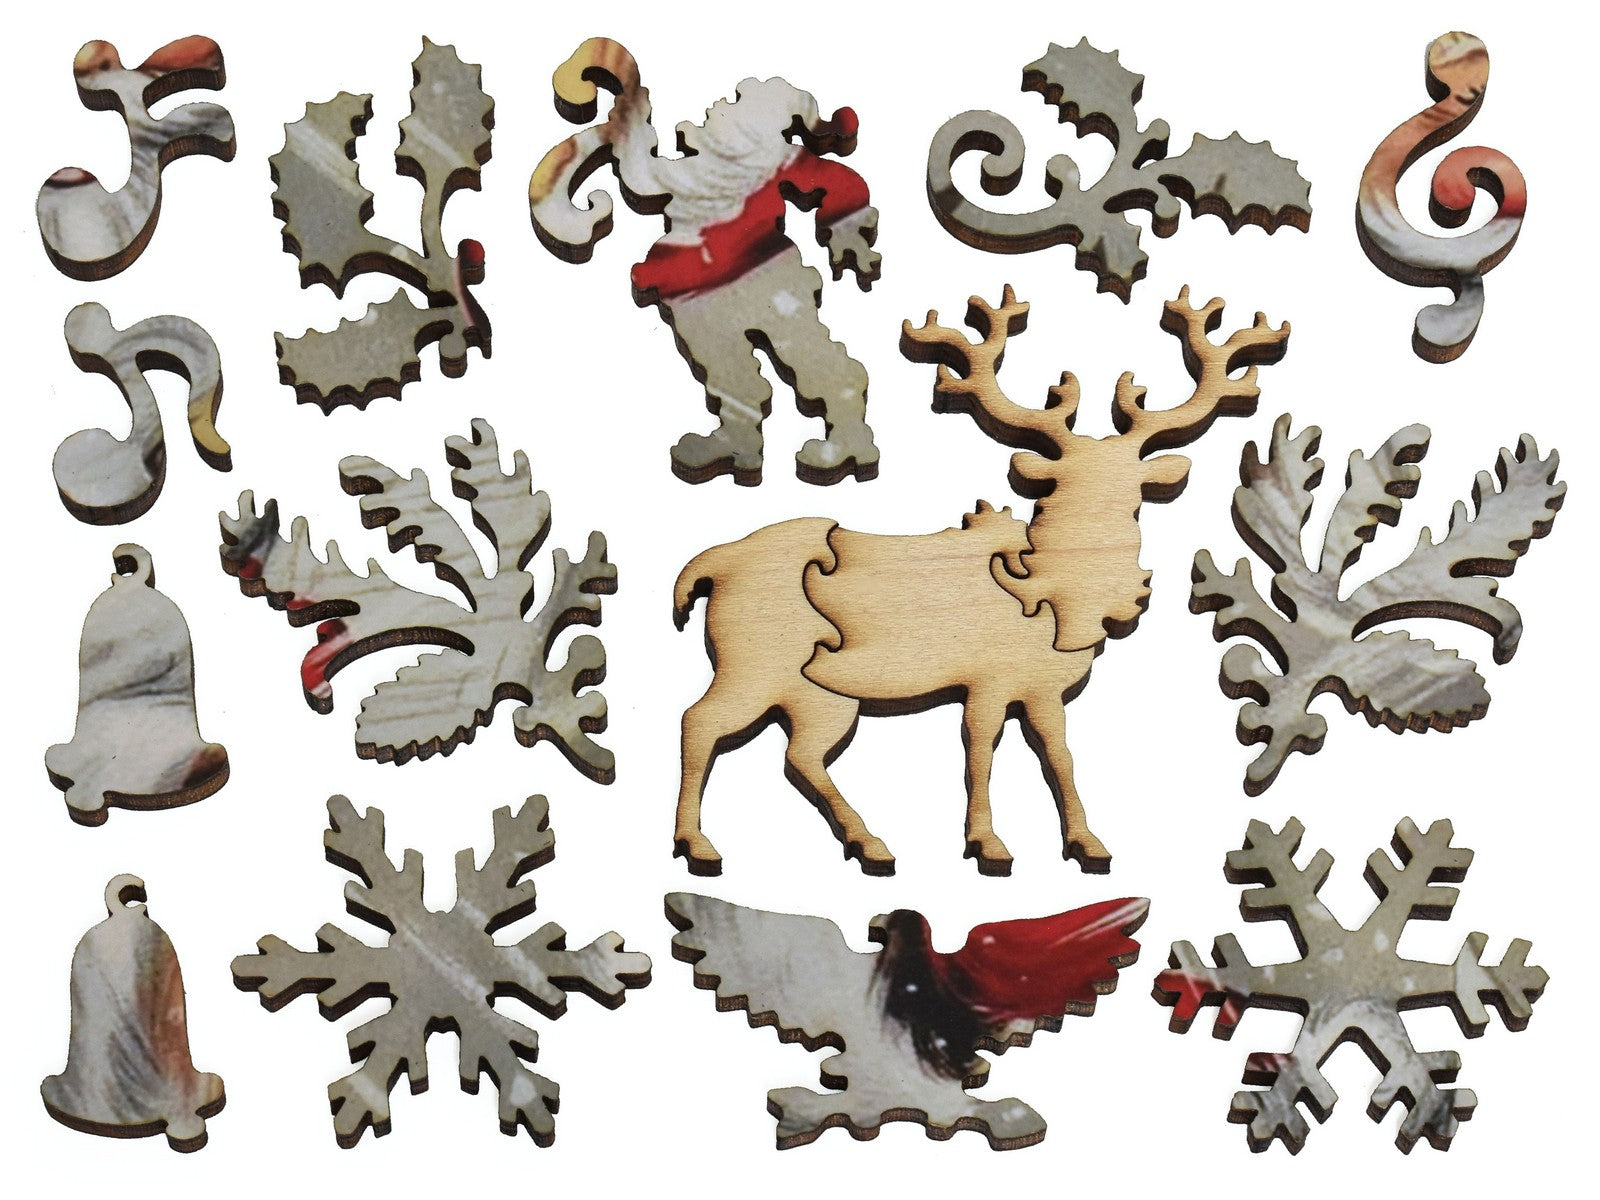 The whimsies that can be found in the puzzle, Deerful Santa.